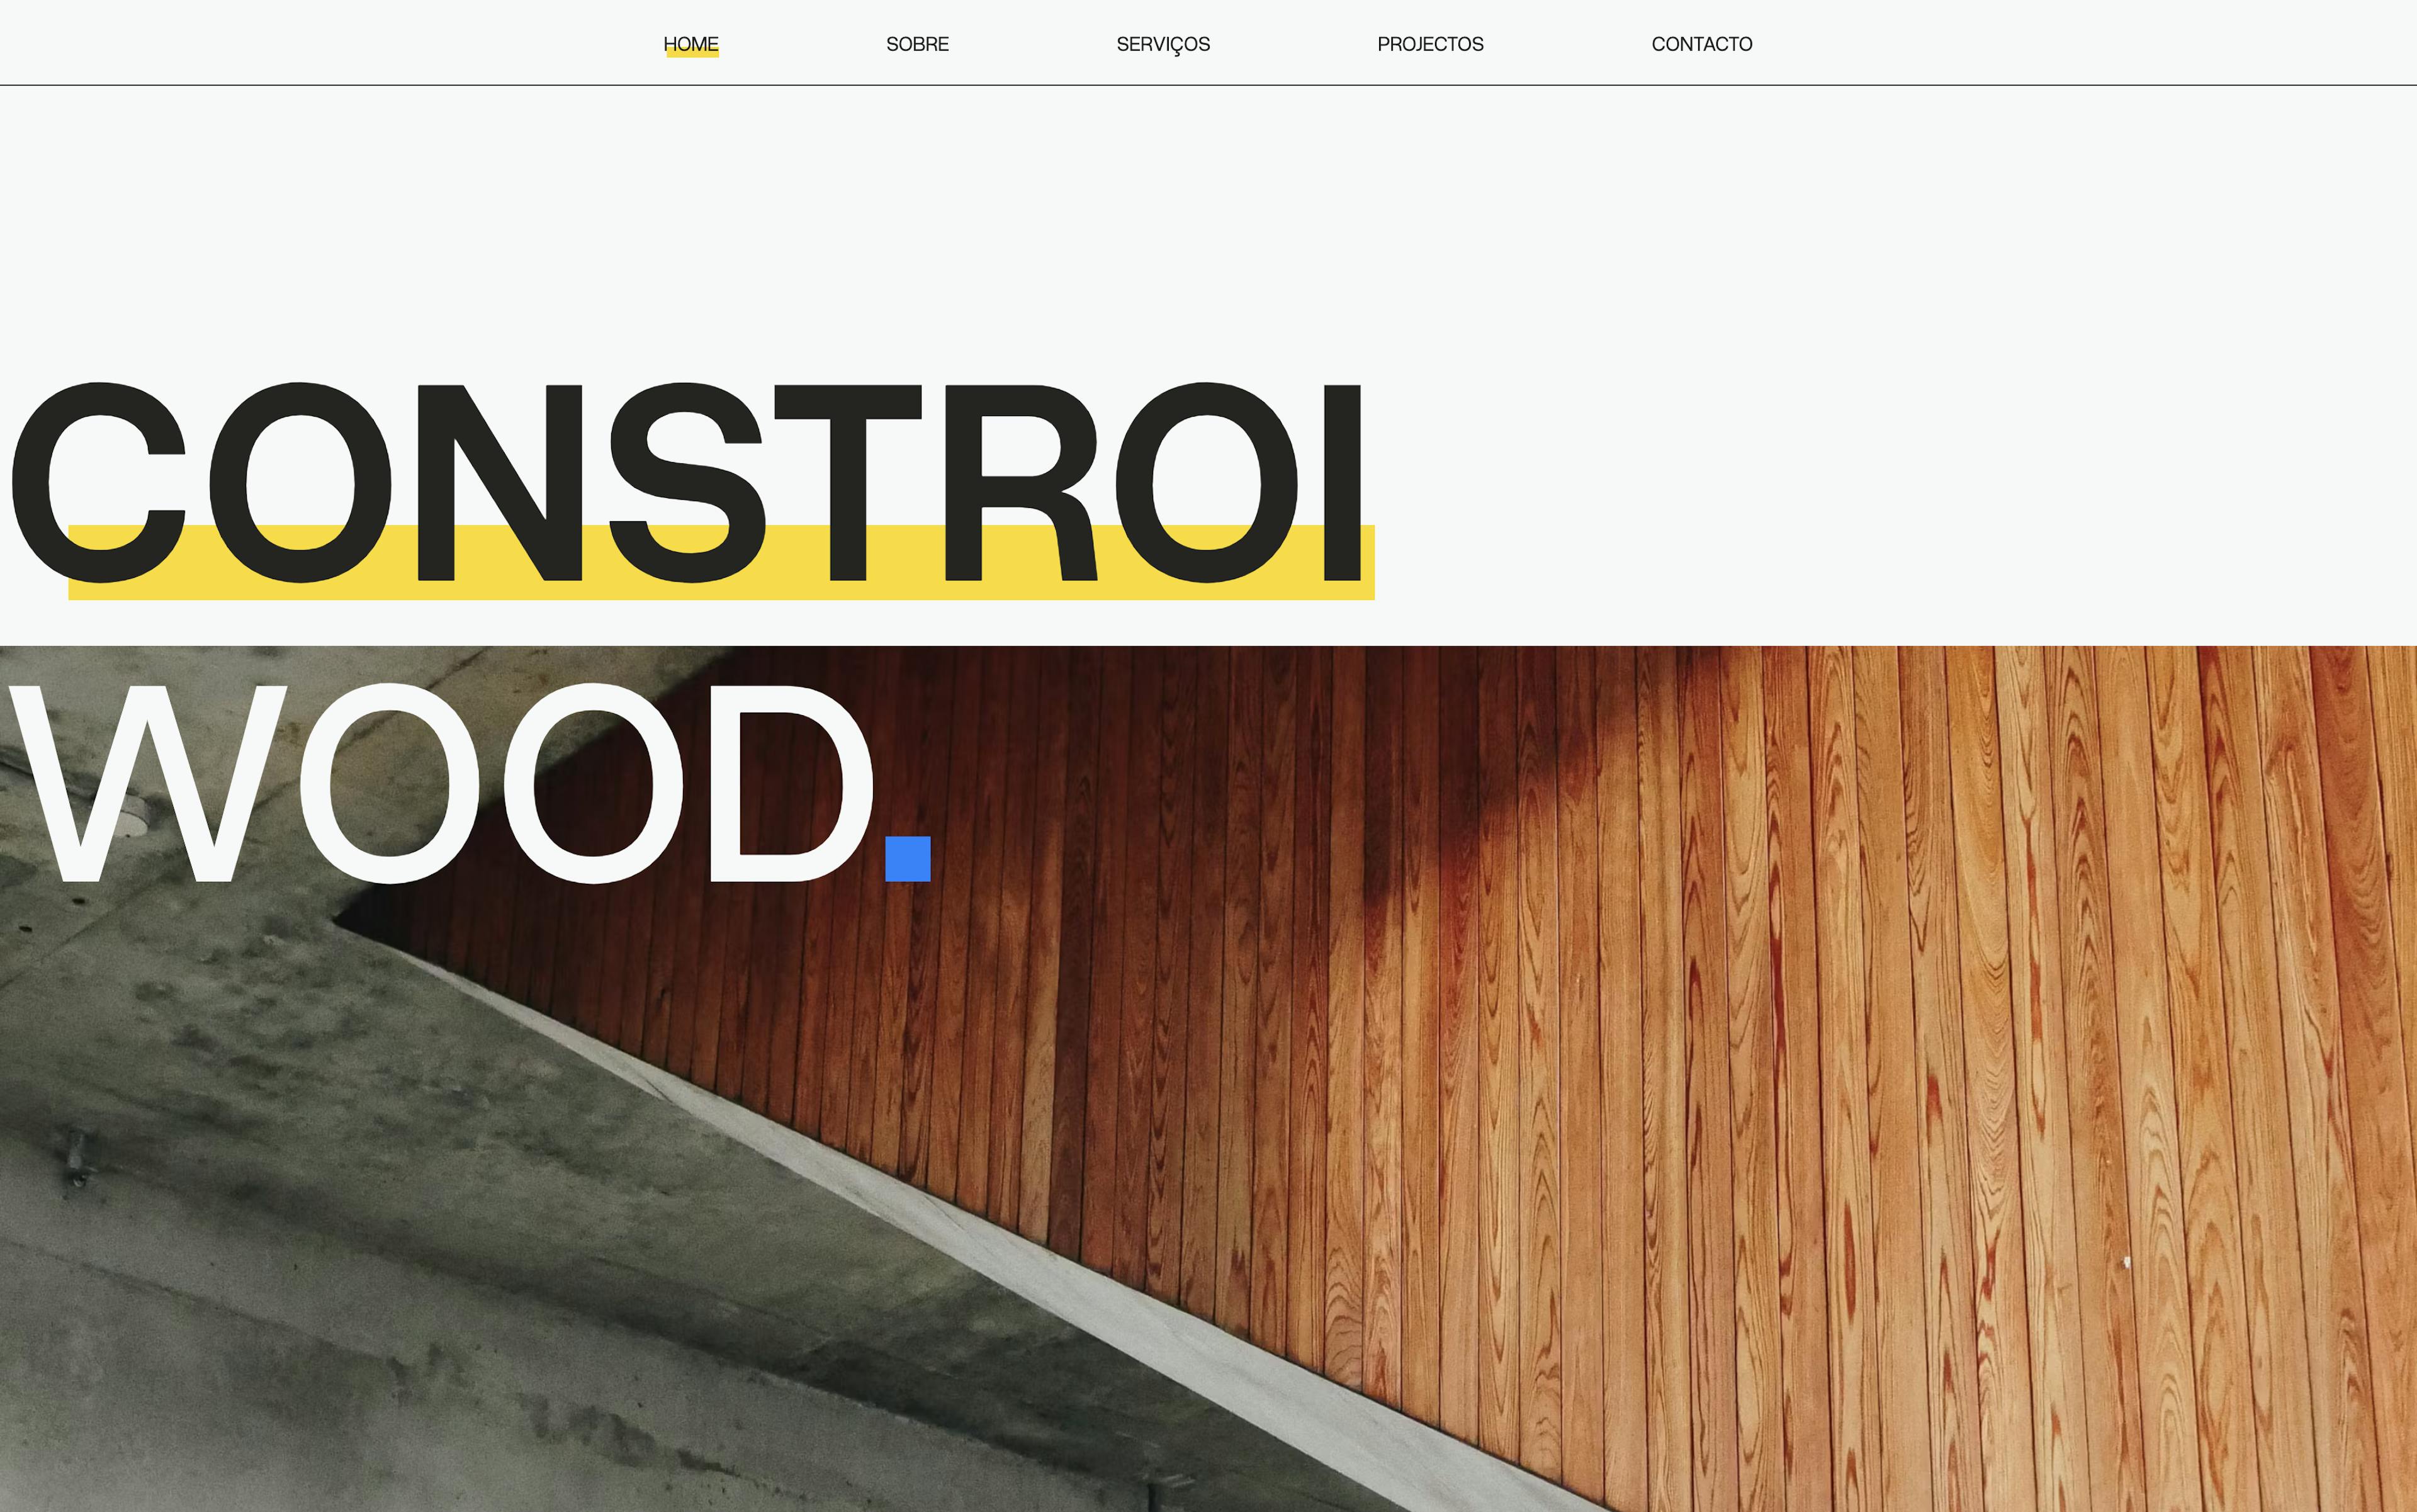 ConstroiWood's homepage